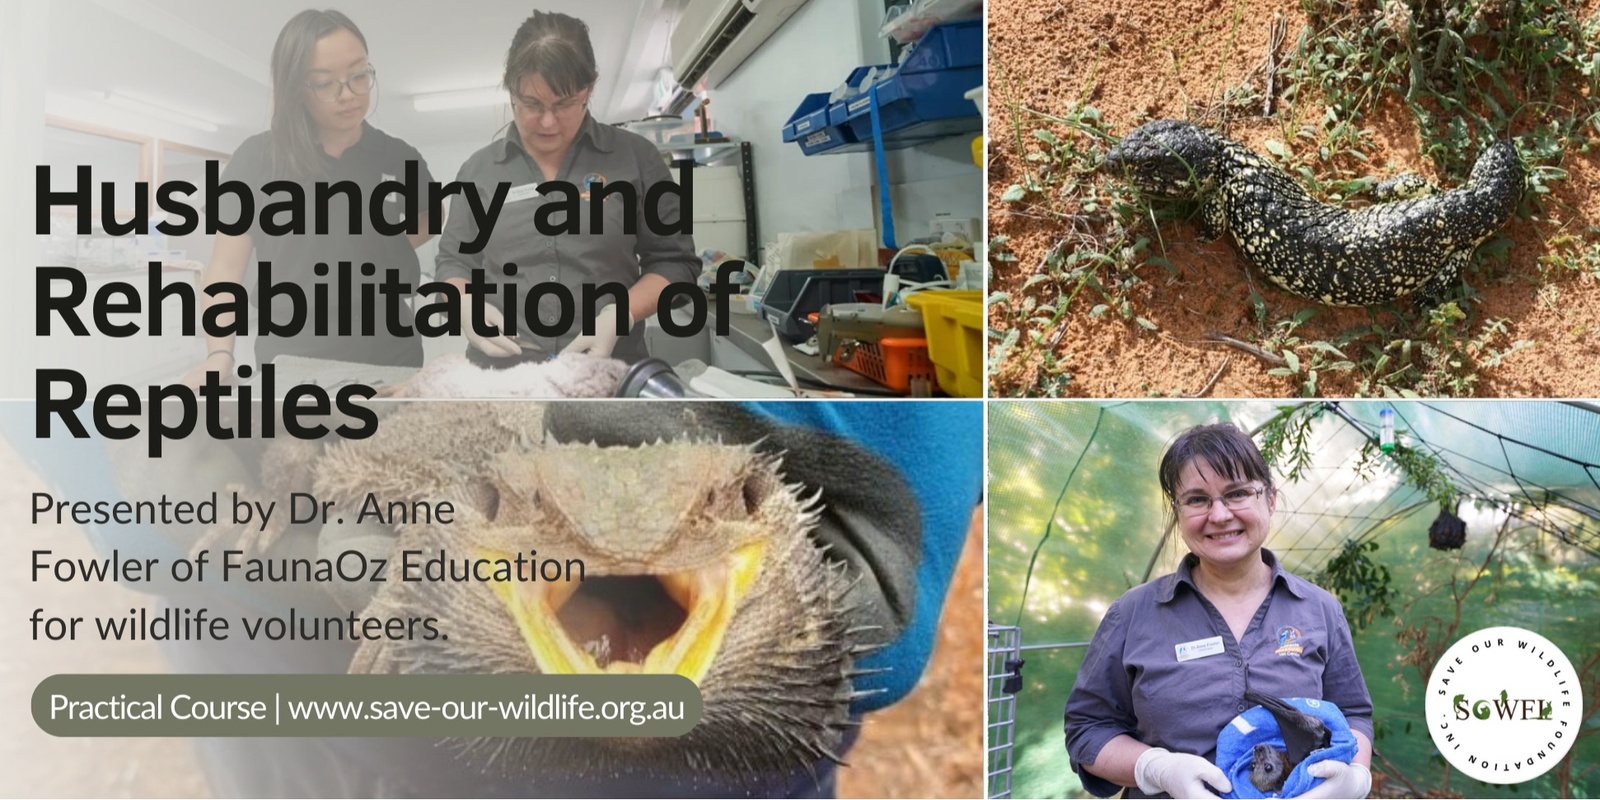 Banner image for Husbandry and Rehabilitation of Reptiles presented by Dr. Anne Fowler